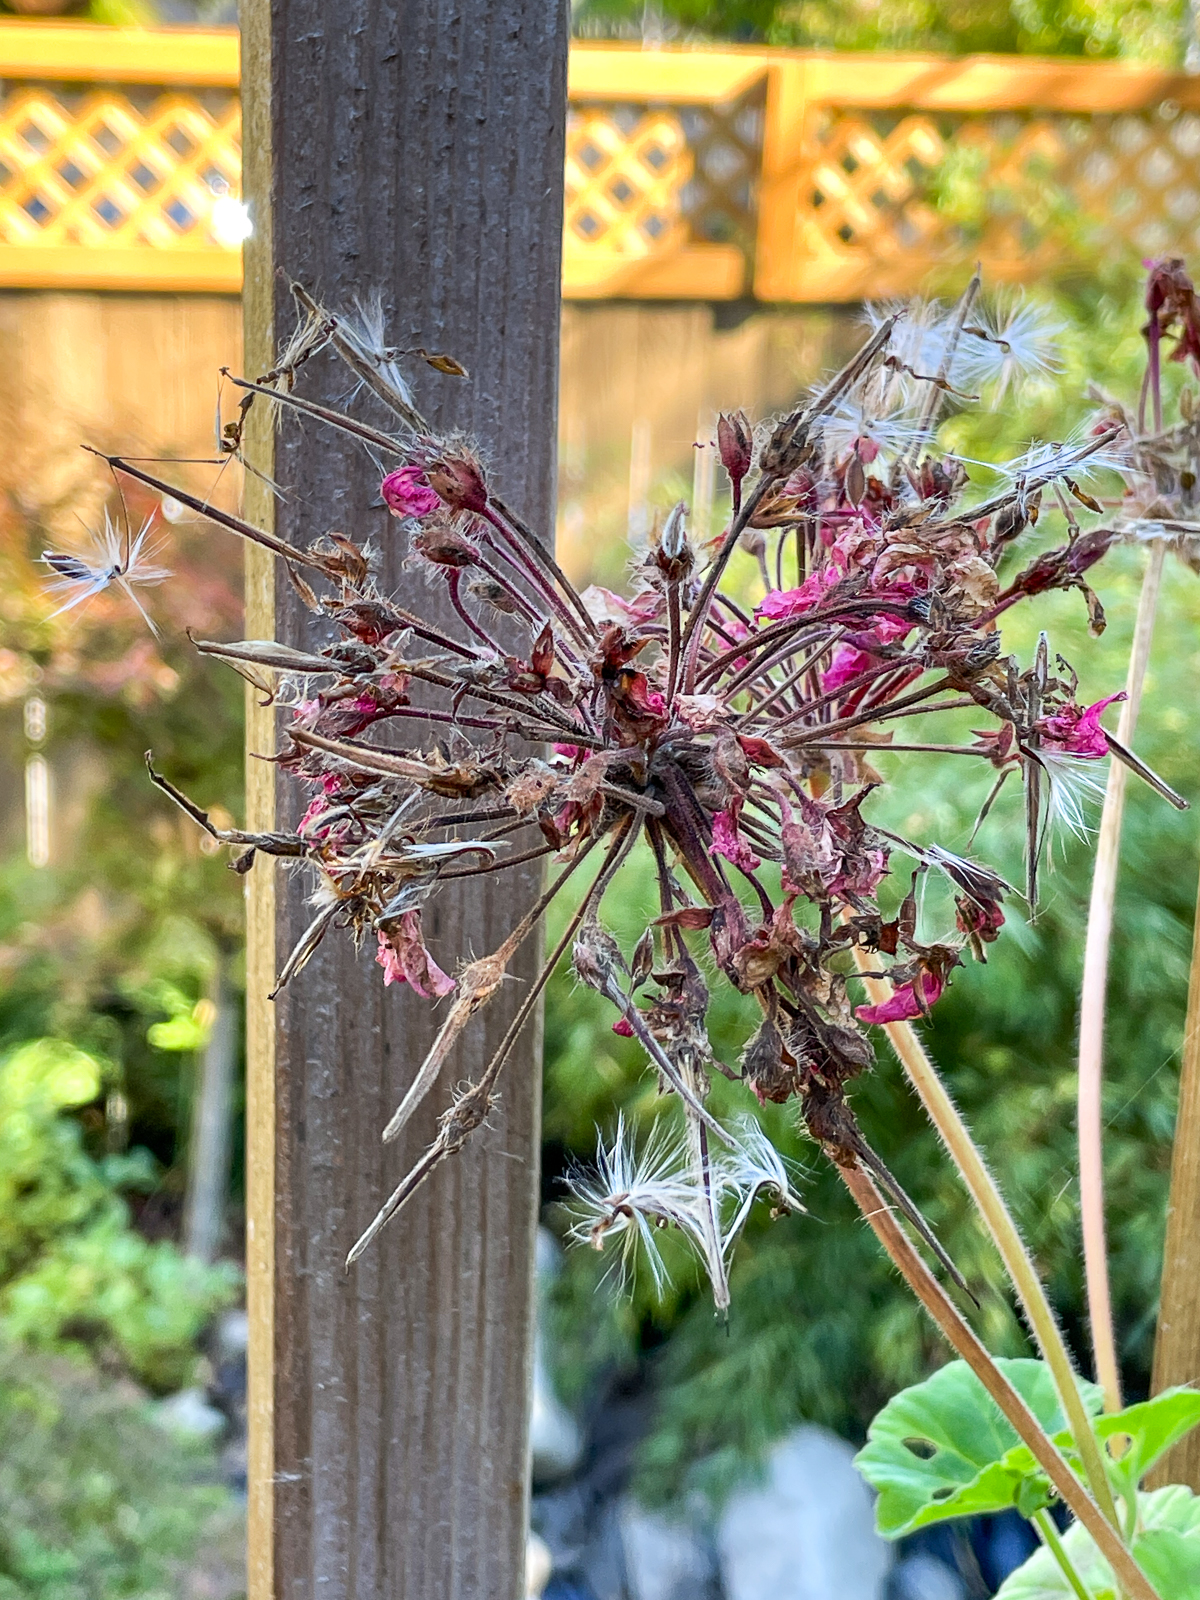 geranium flower head with ripe seed pods